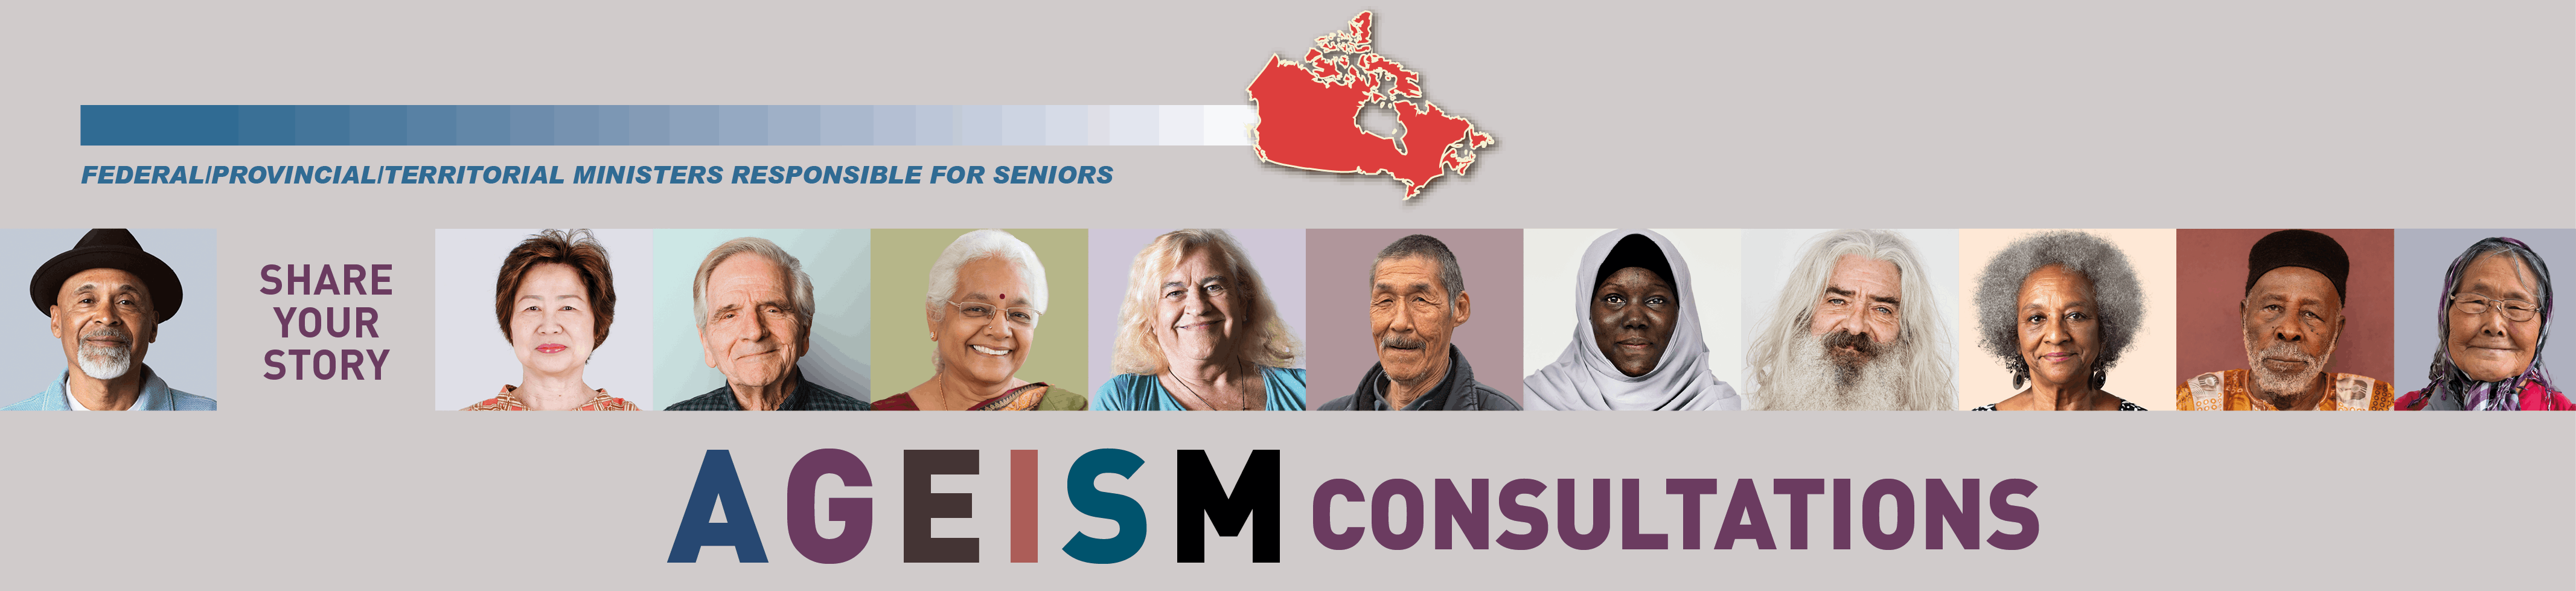 Ageism consultation banner